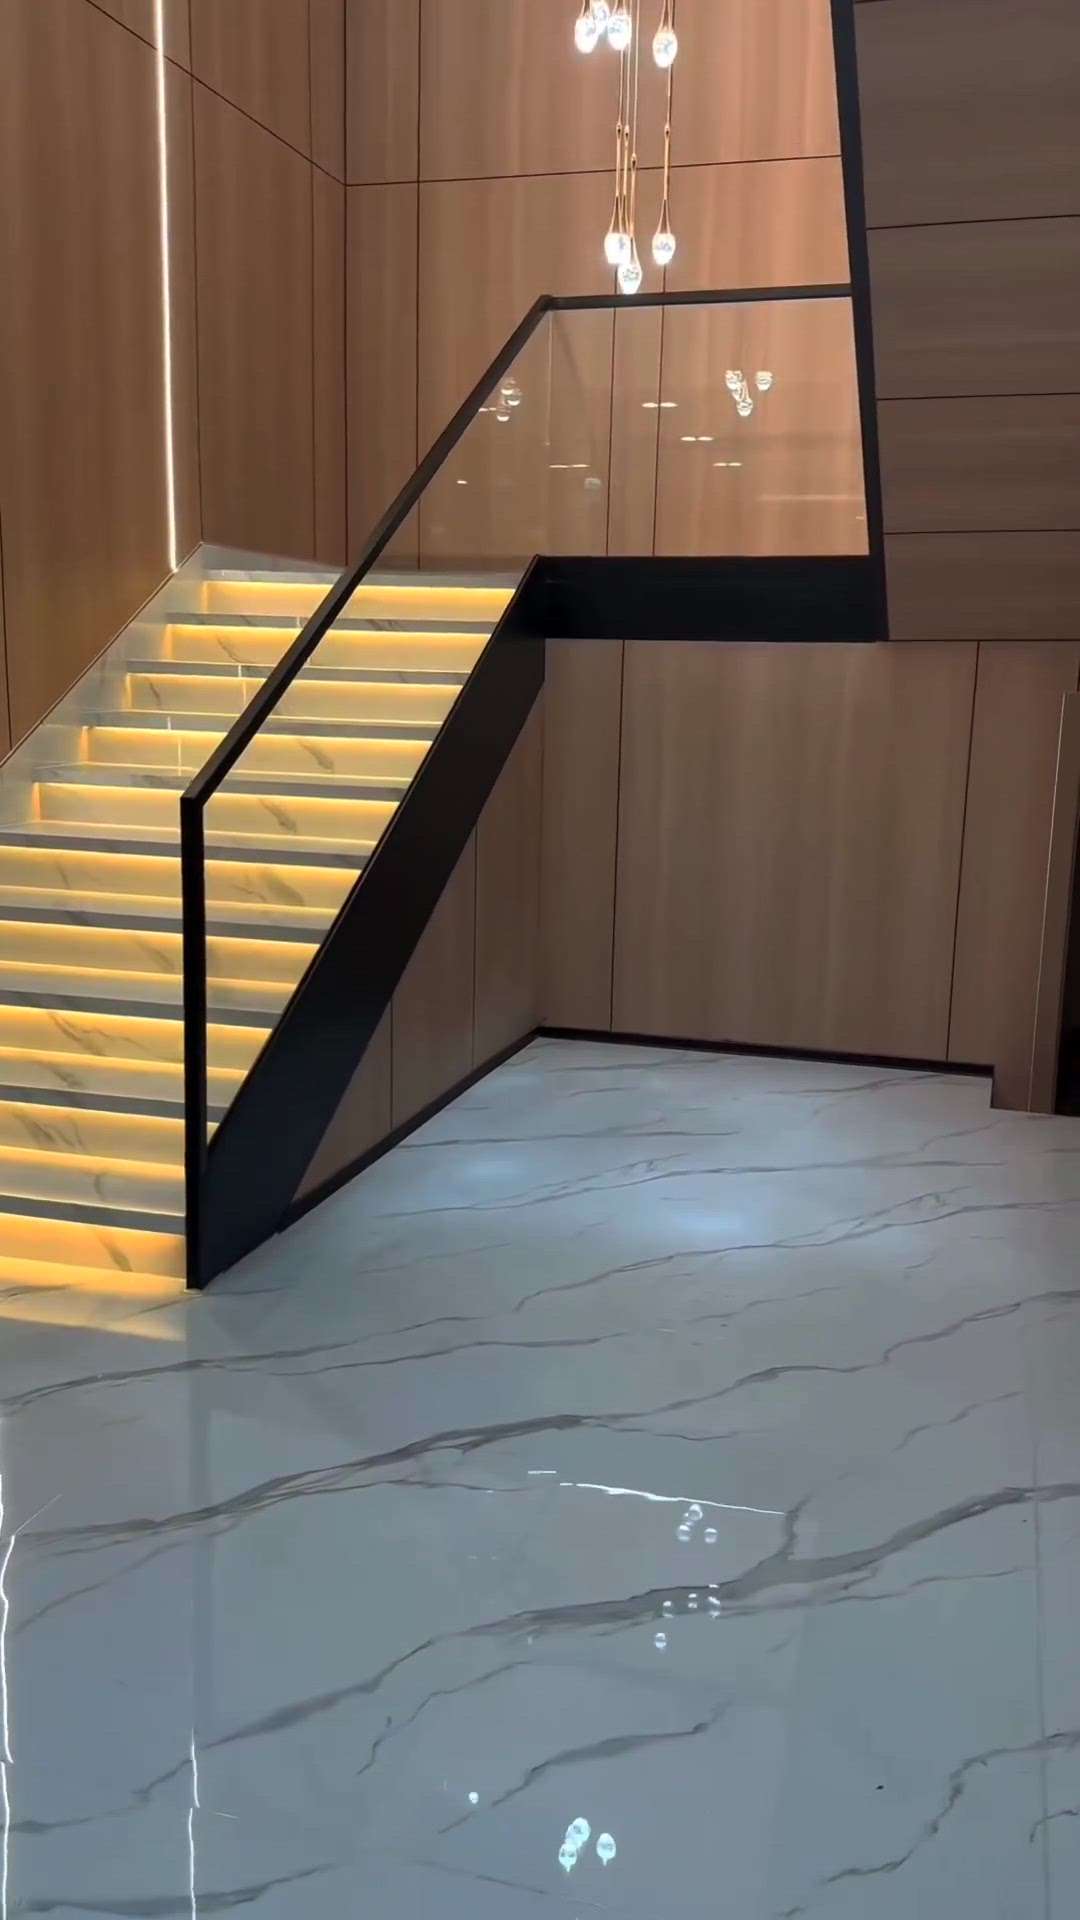 This Is What We Design In Staircase.
.
.
CONTACT FOR MORE AND DM FOR DESIGNING 
.
.
#StaircaseDecors #InteriorDesigner #LivingRoomDecors #profile #creative